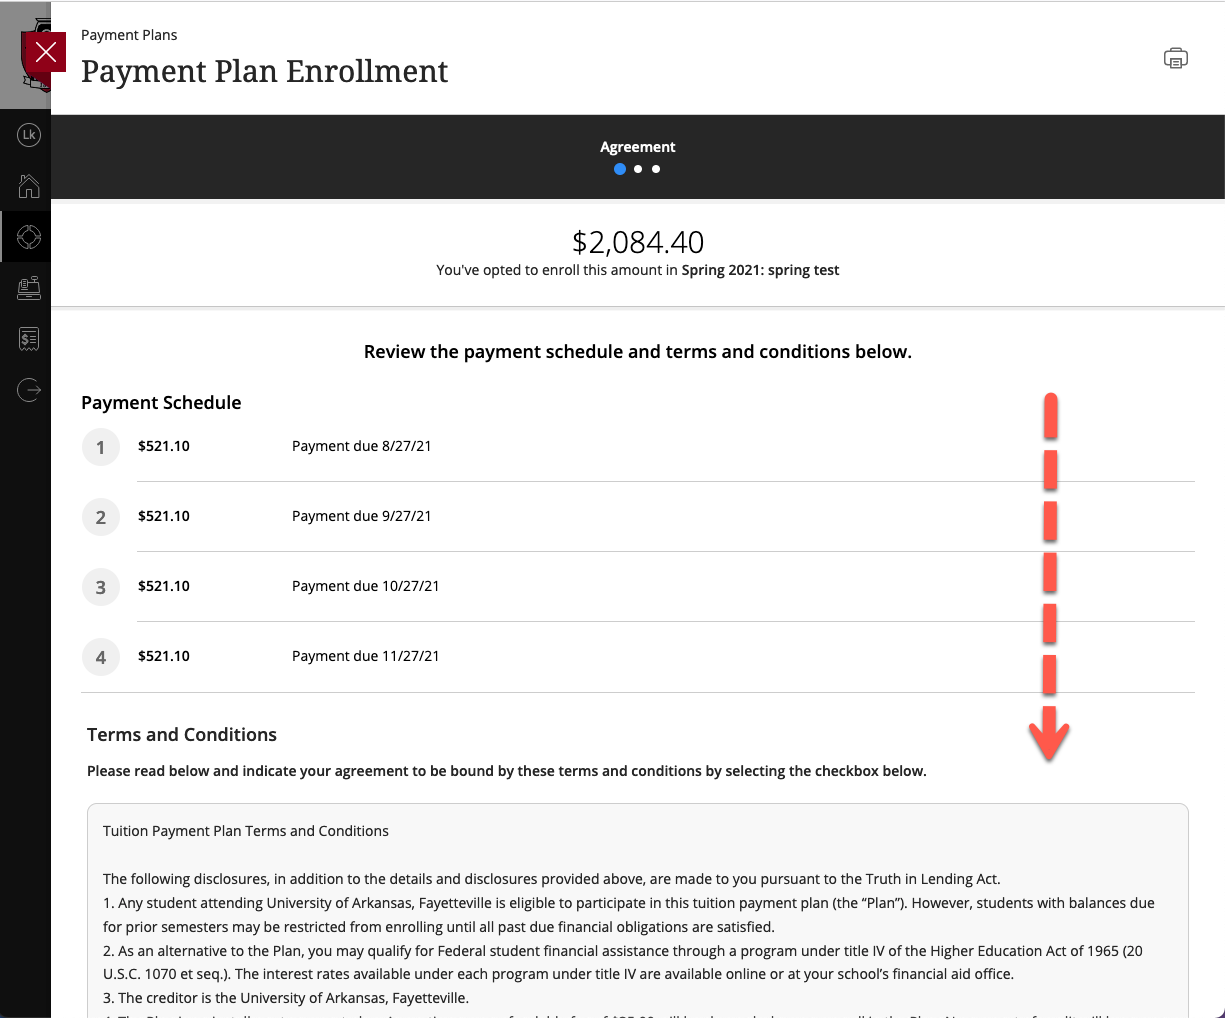 A screen with text detailing the terms of the payment plan.